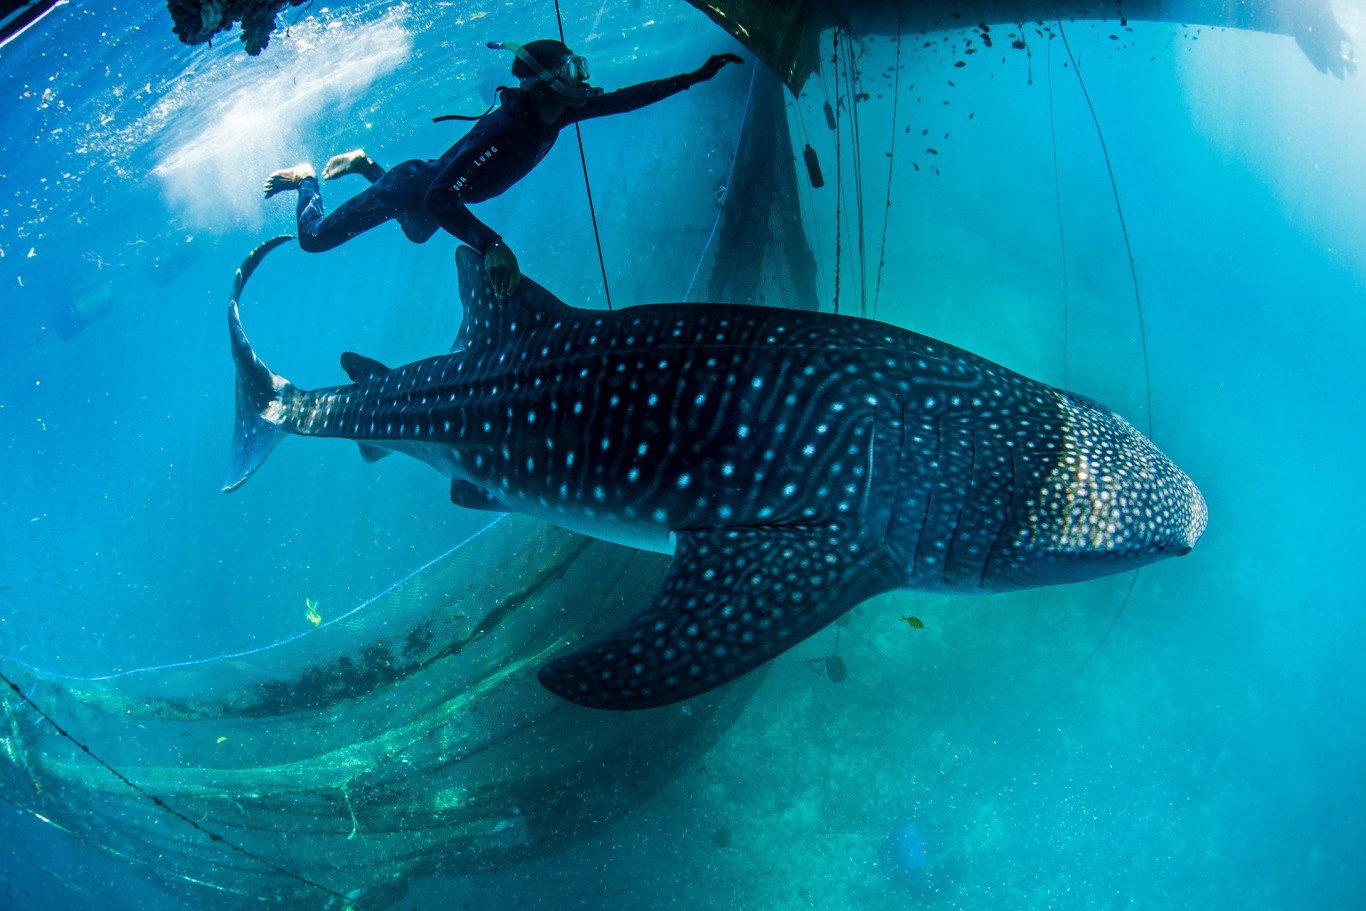 One of the whale sharks makes its way out of the net and back into the open ocean 